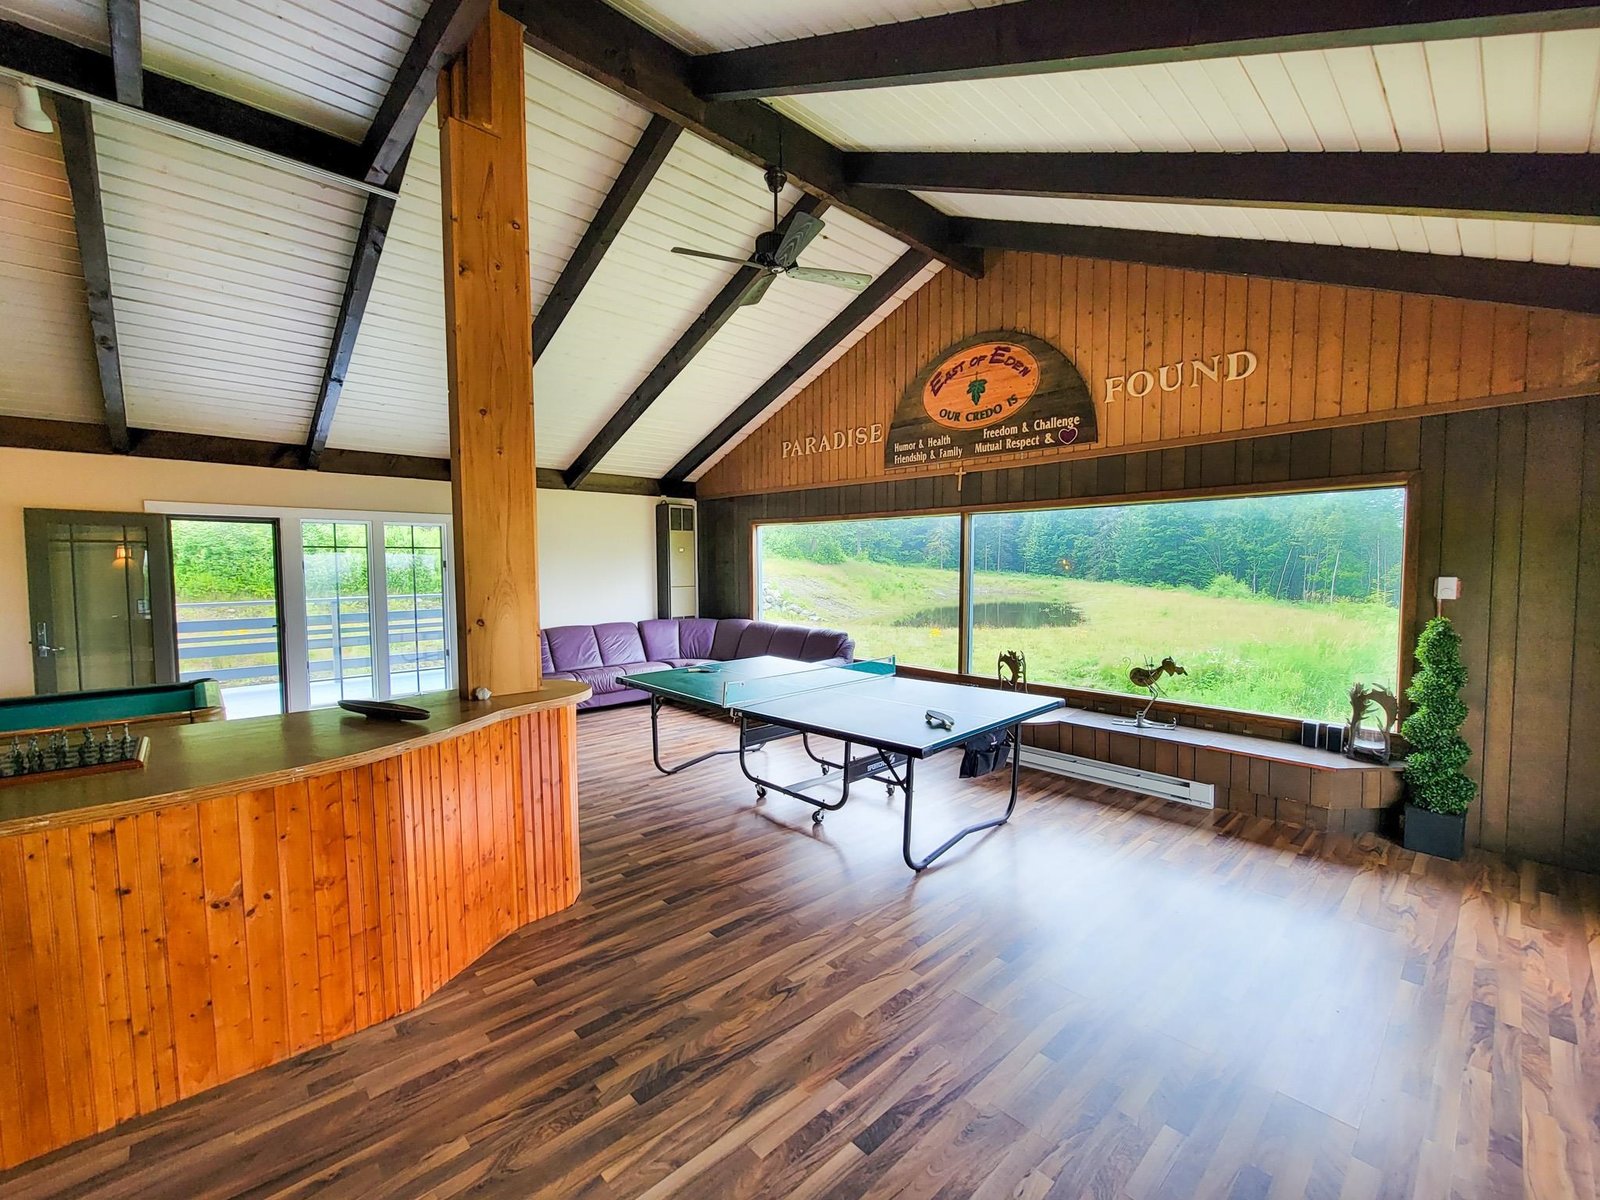 Enjoy the view of Belvidere Mountain from the outdoor firepit